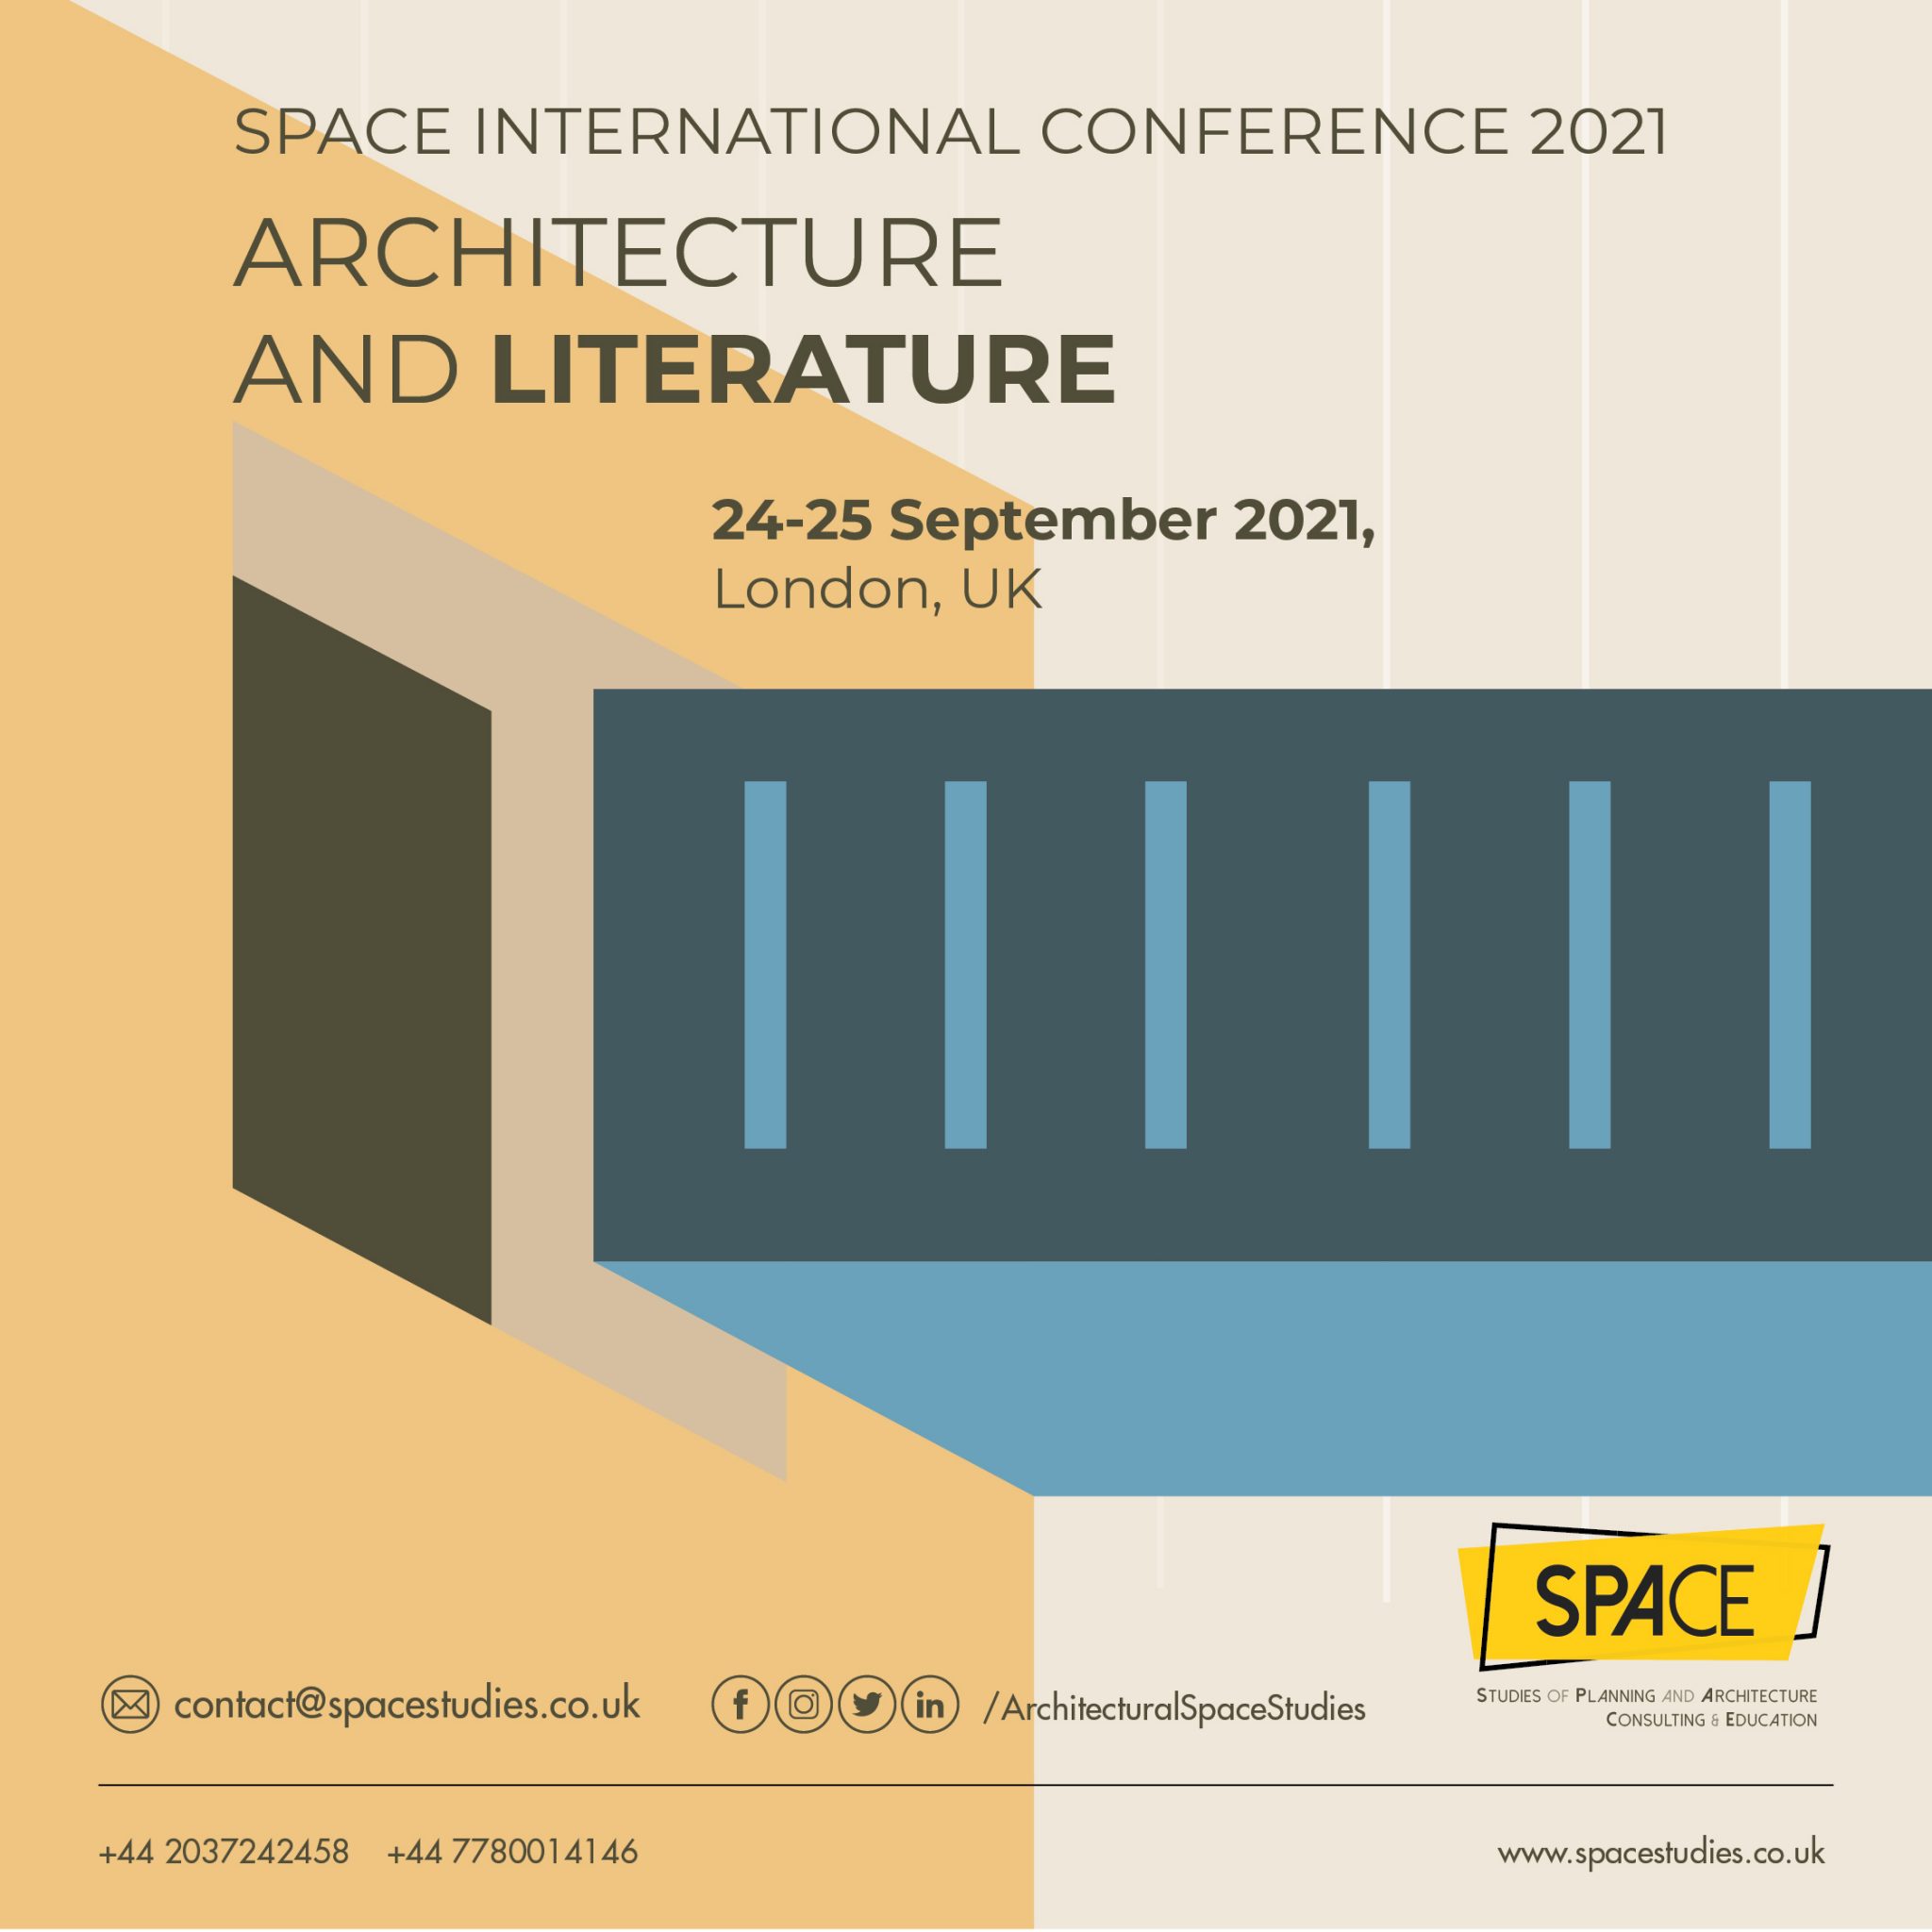 SPACE International Conference 2021 on Architecture and Literature